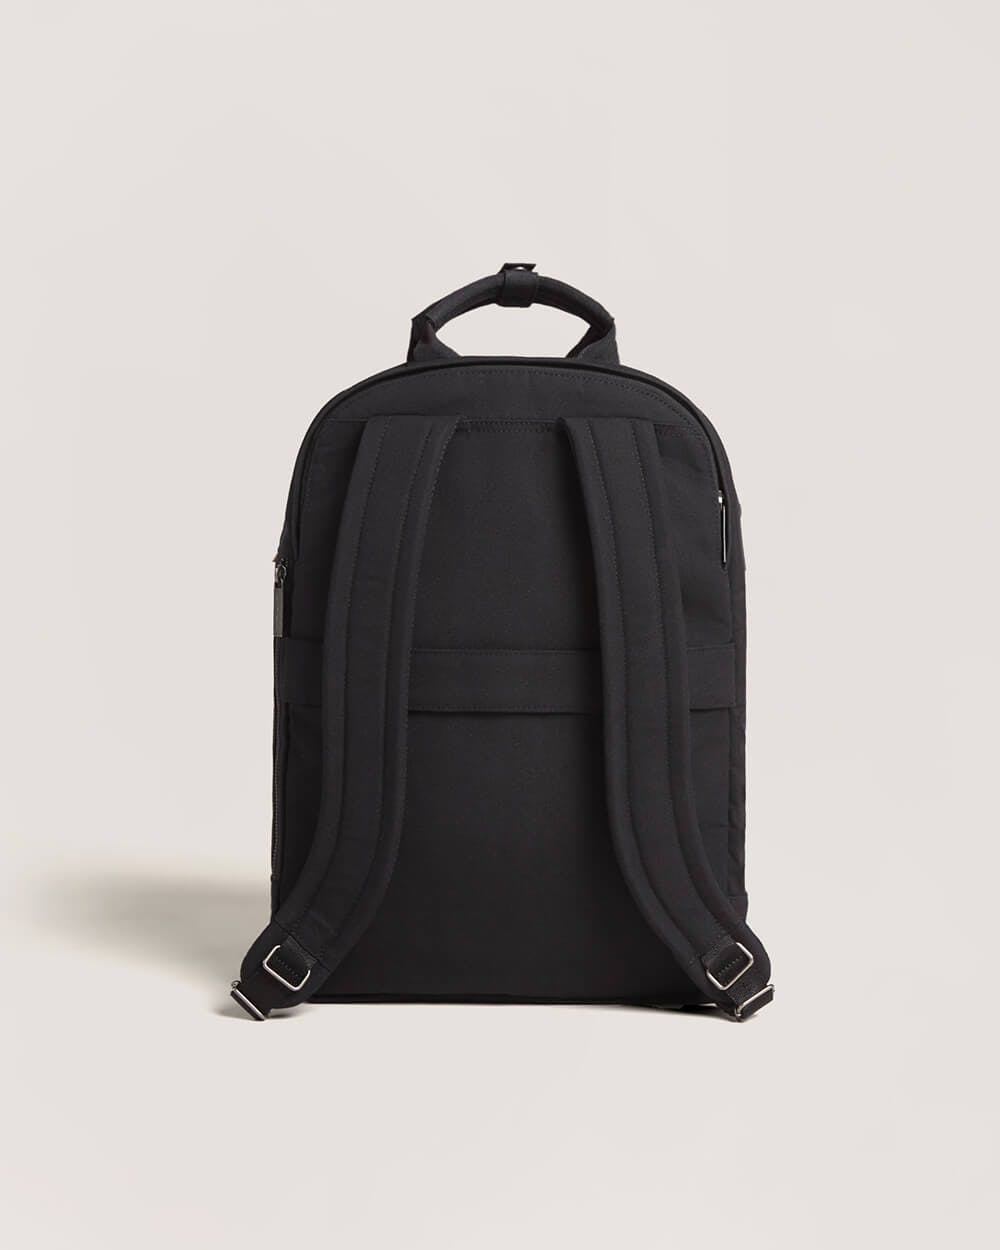 The Backpack - Nocturnal Black